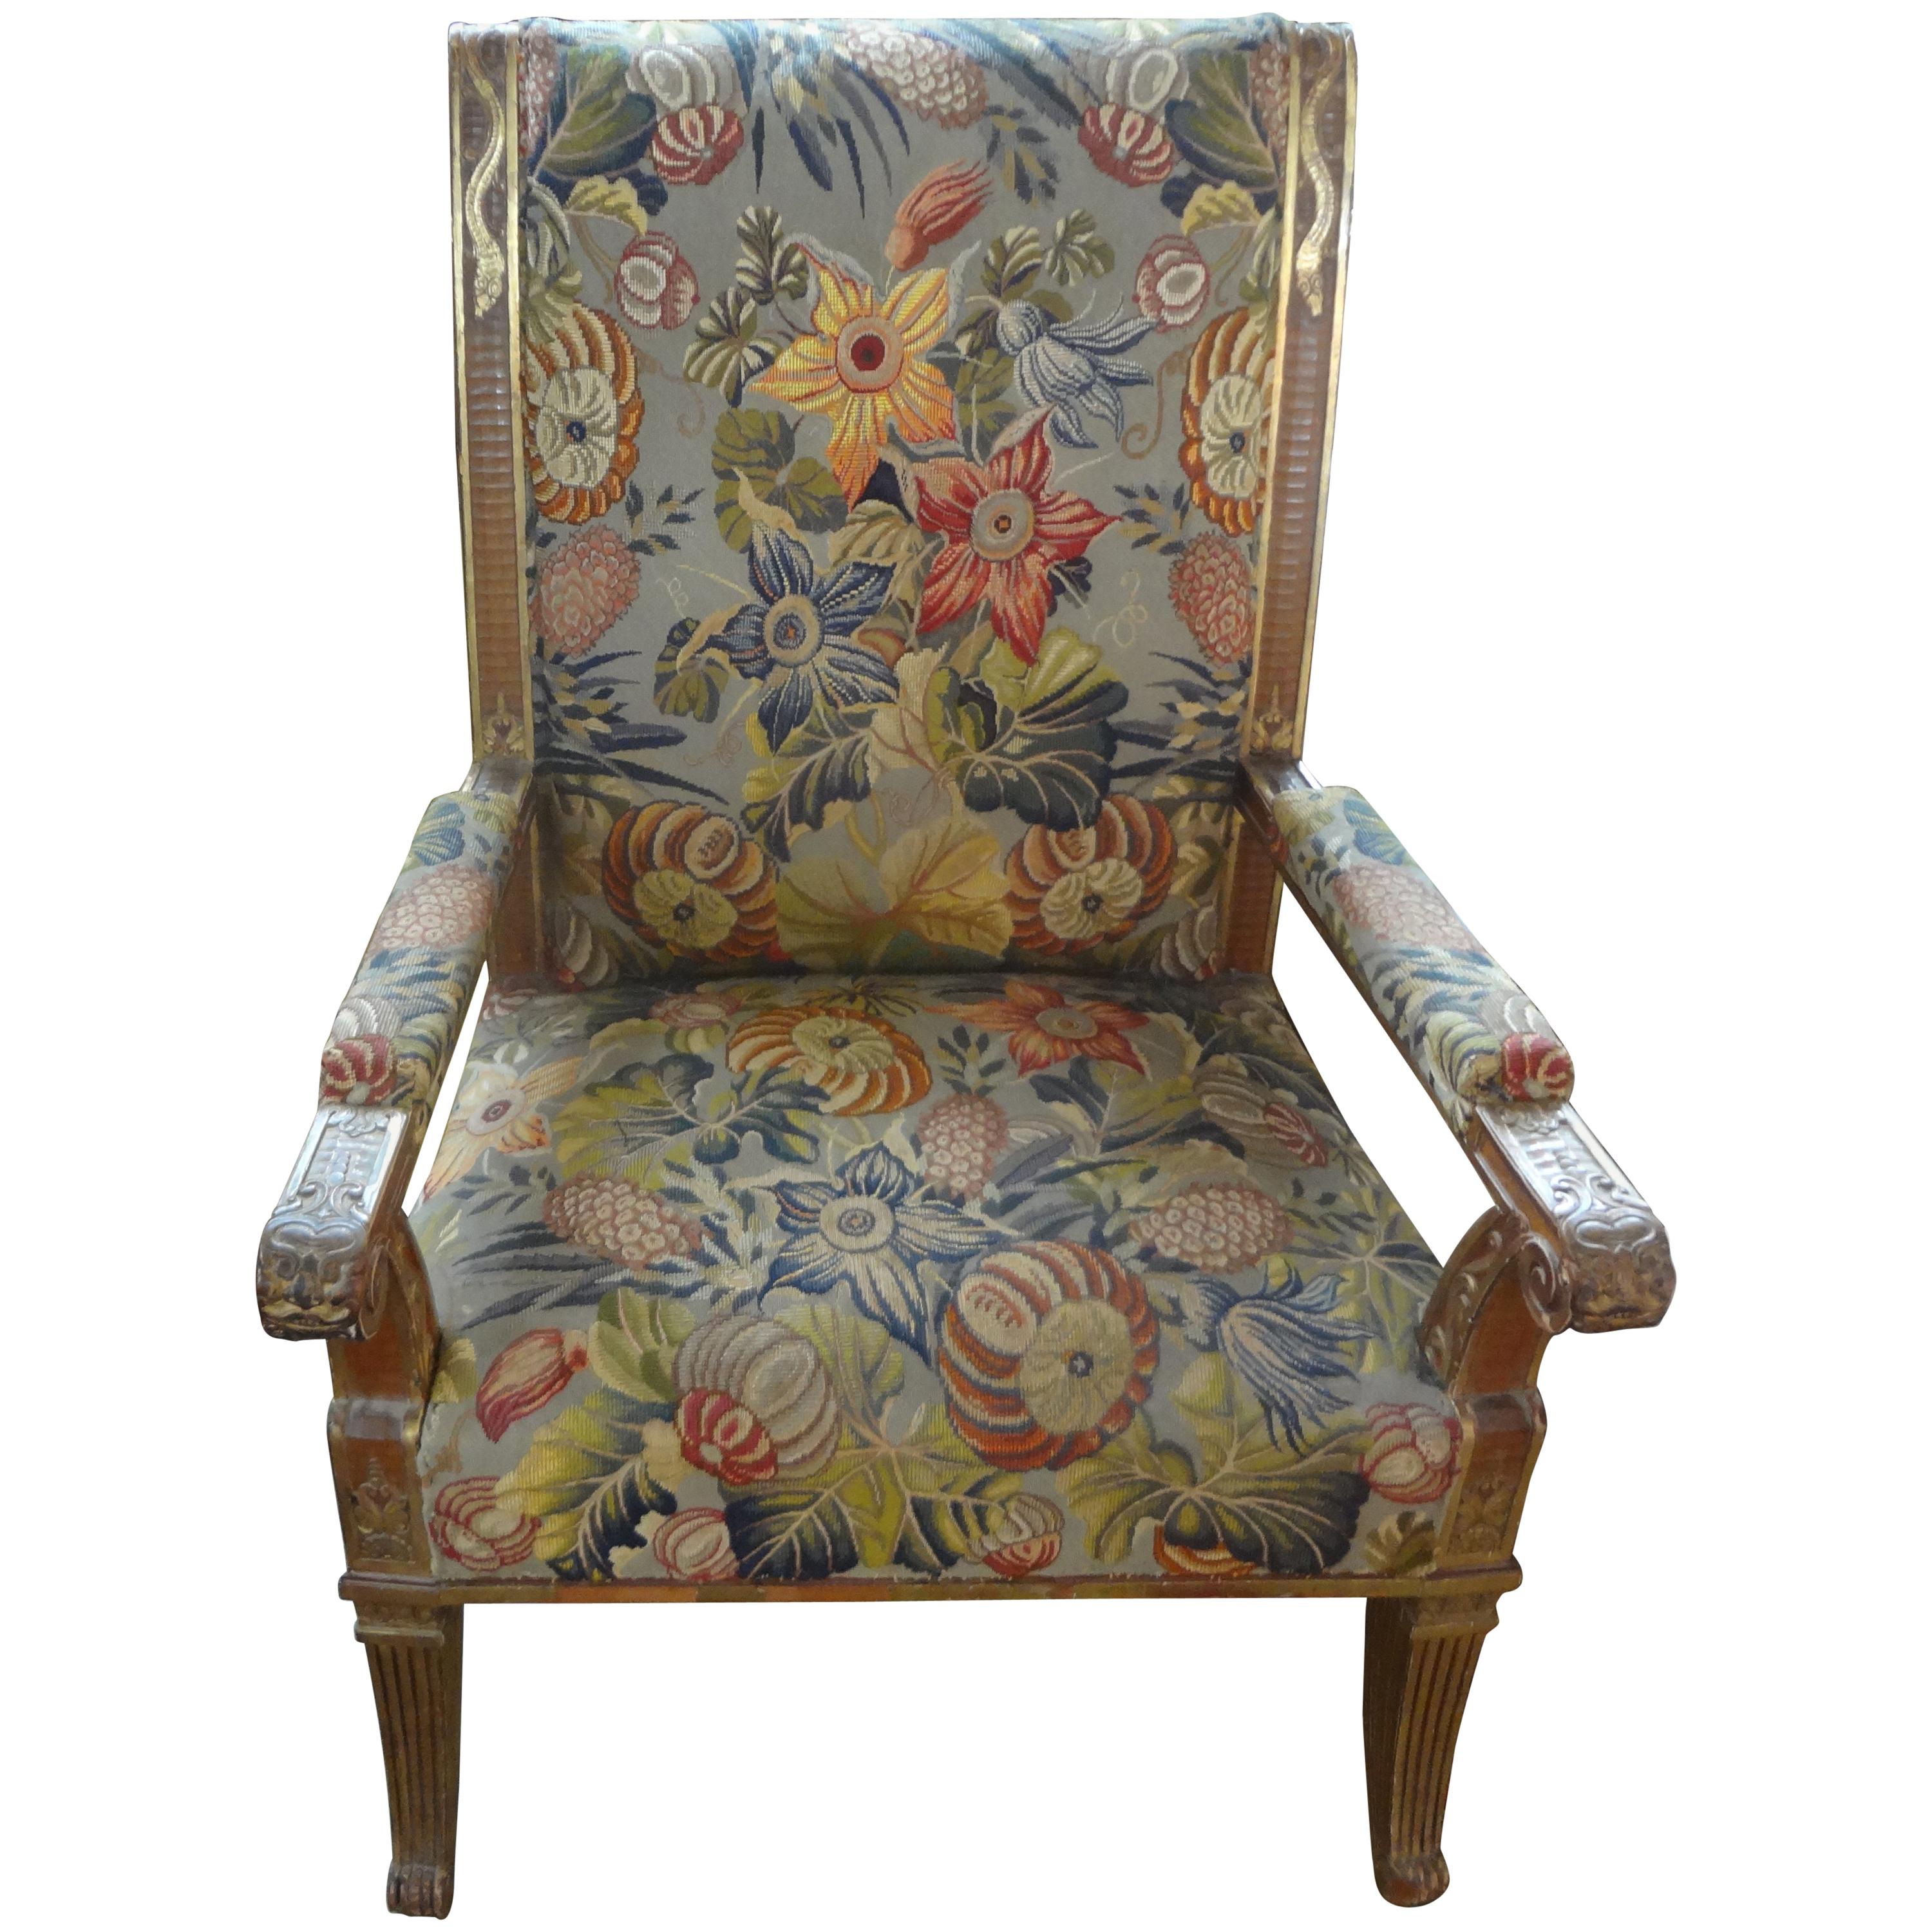 Magnificent 19th century French Louis XVI style gilt wood chair, armchair or fauteuil with splayed legs. This unusual, rare one of a kind antique French gilt chair has beautiful details throughout including serpents or snakes and Klismos style legs.